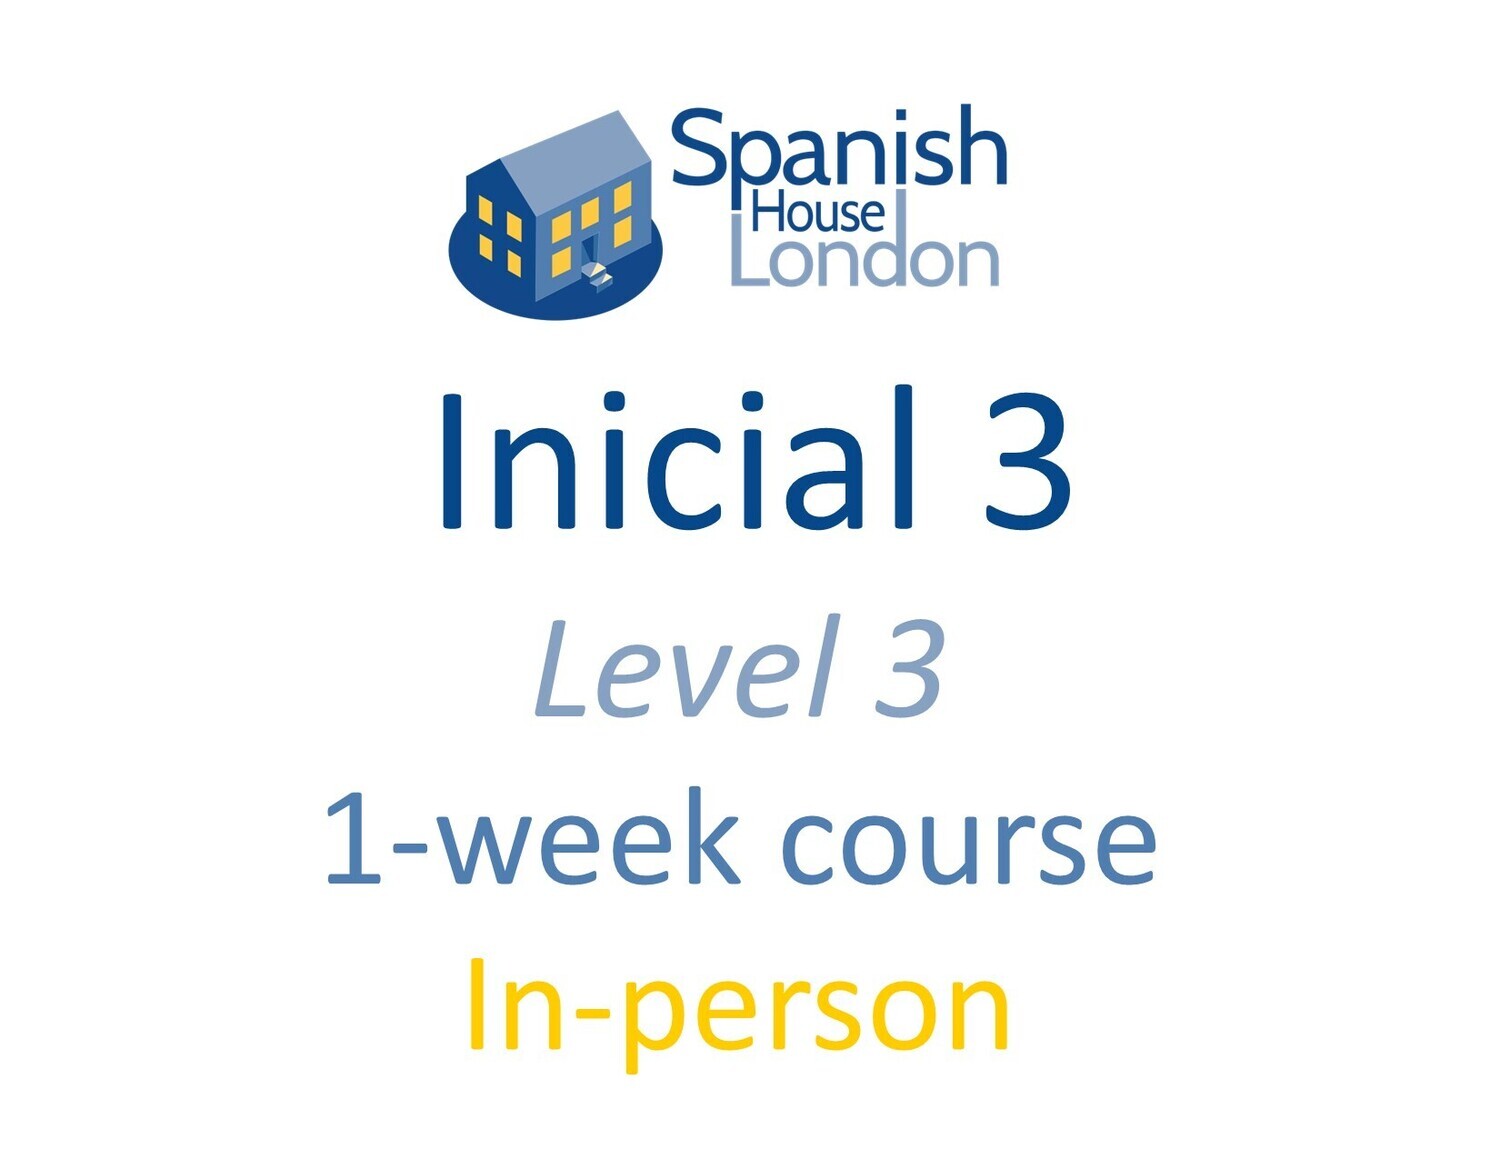 One-Week Intensive Inicial 3 Course starting on 9th October at 10.30am in Clapham North